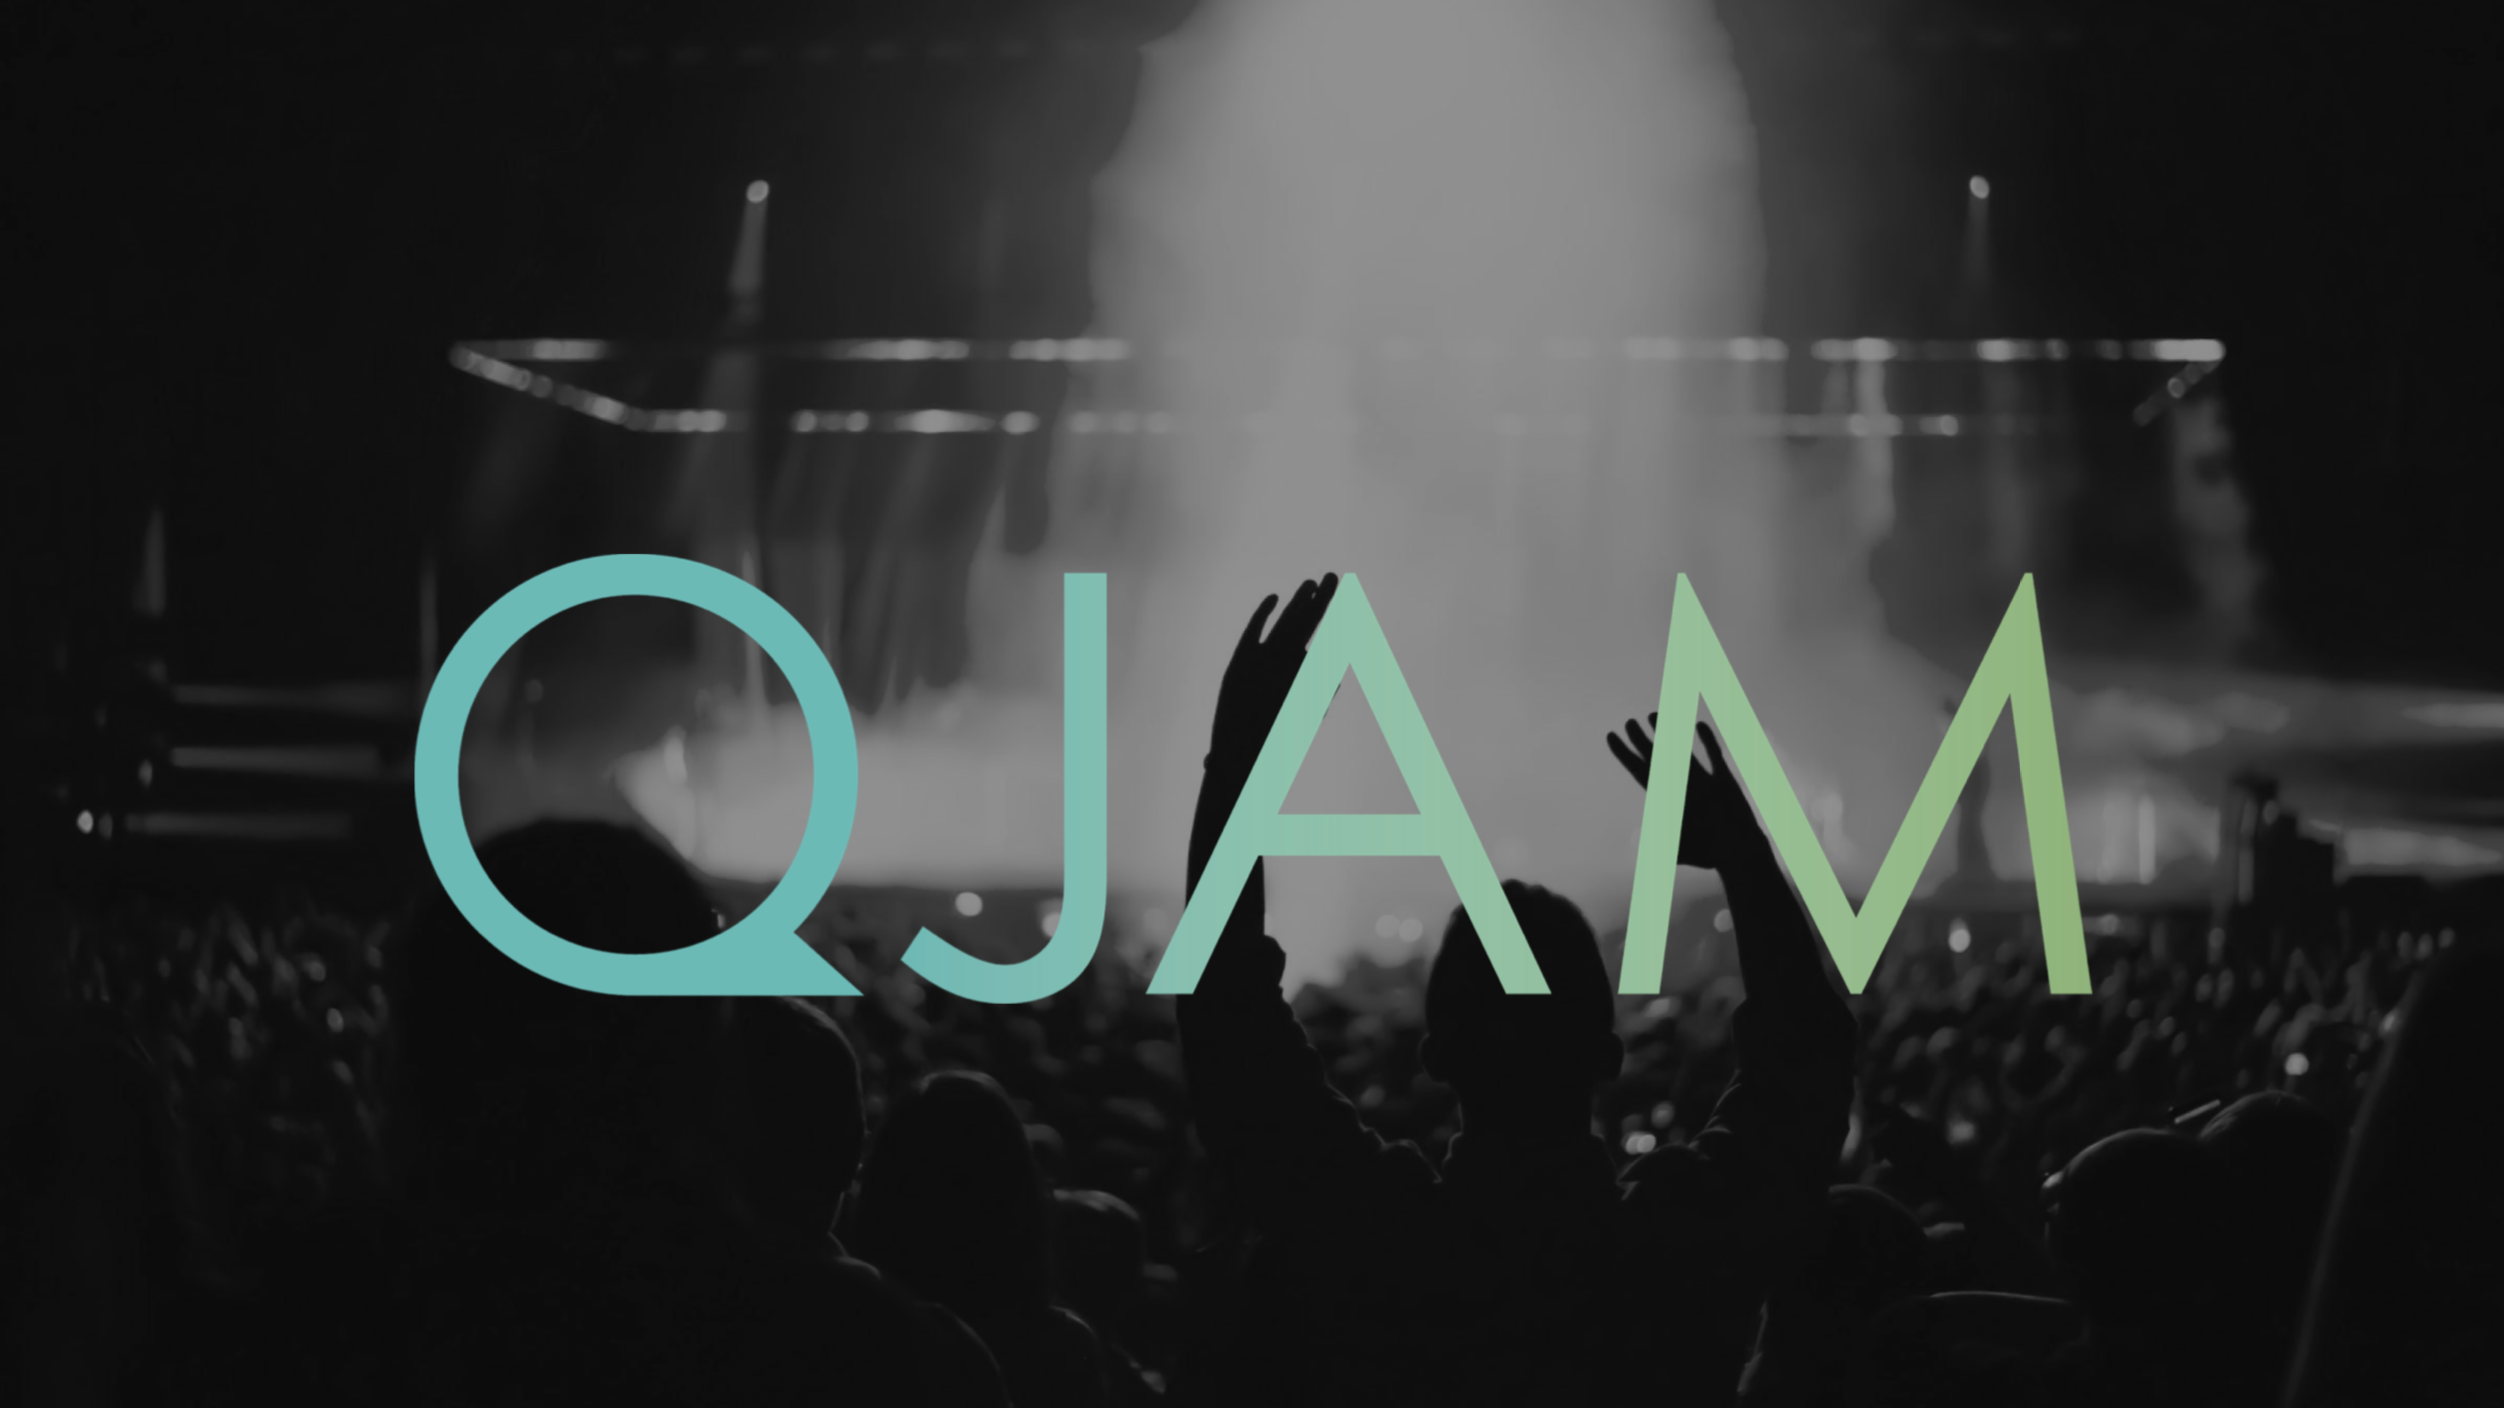 Qjam cover image.png